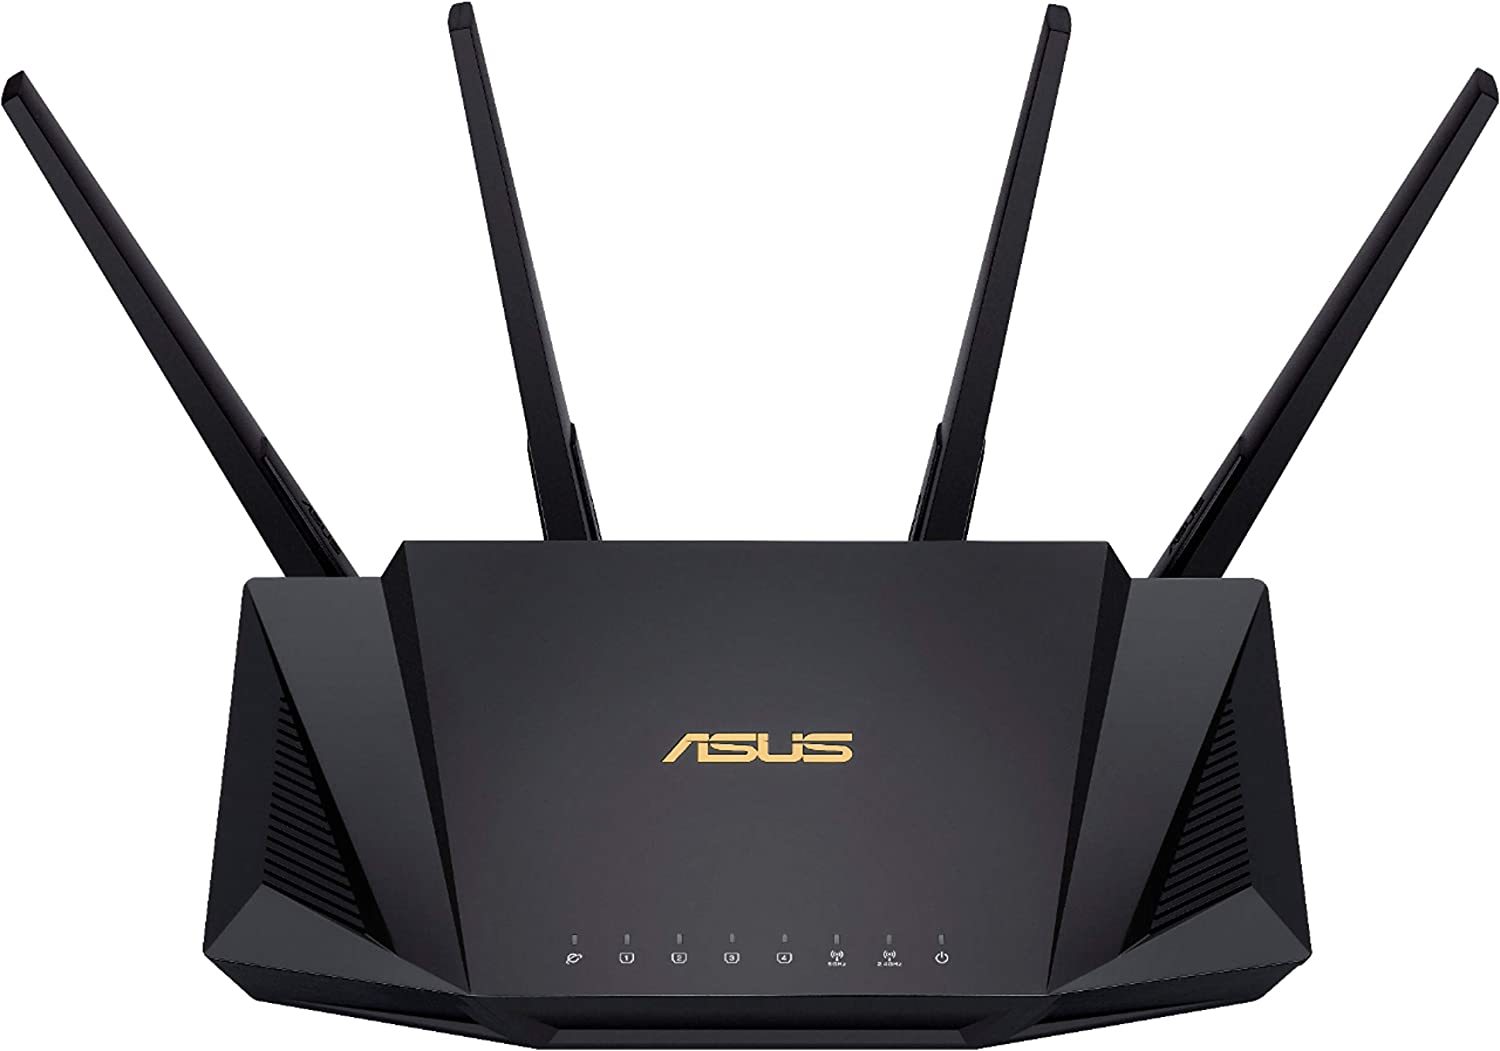 Primary image for ASUS RT-AX58U Dual Band WIFI Router (RT-AX3000) (Renewed)